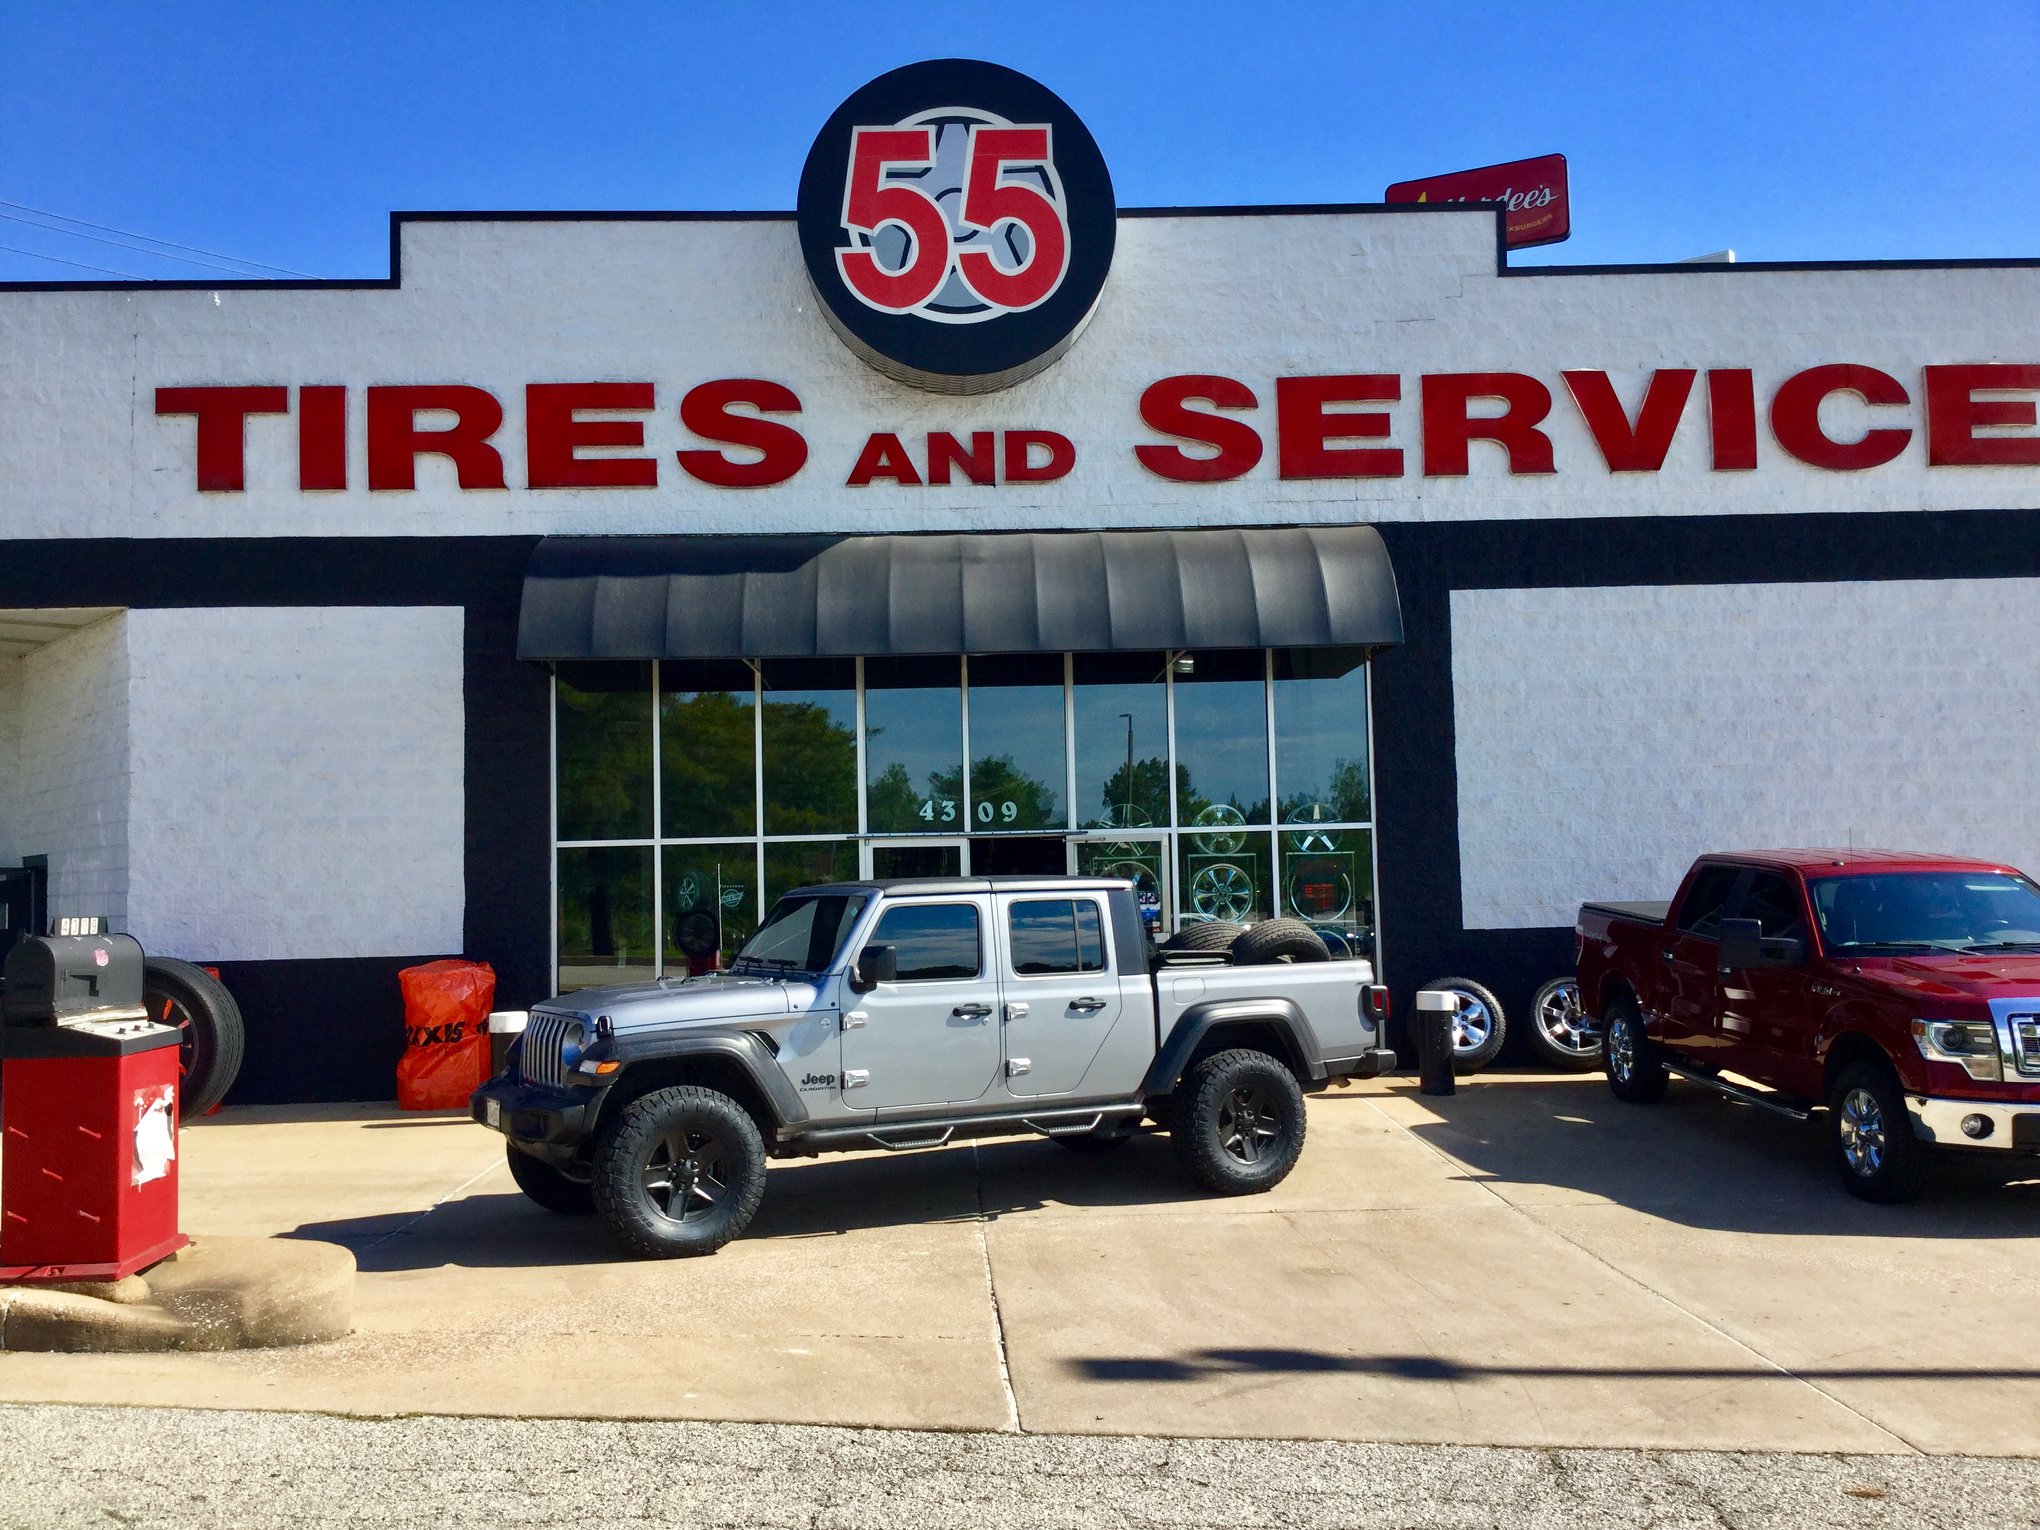 55 Tires and Service and Service Building